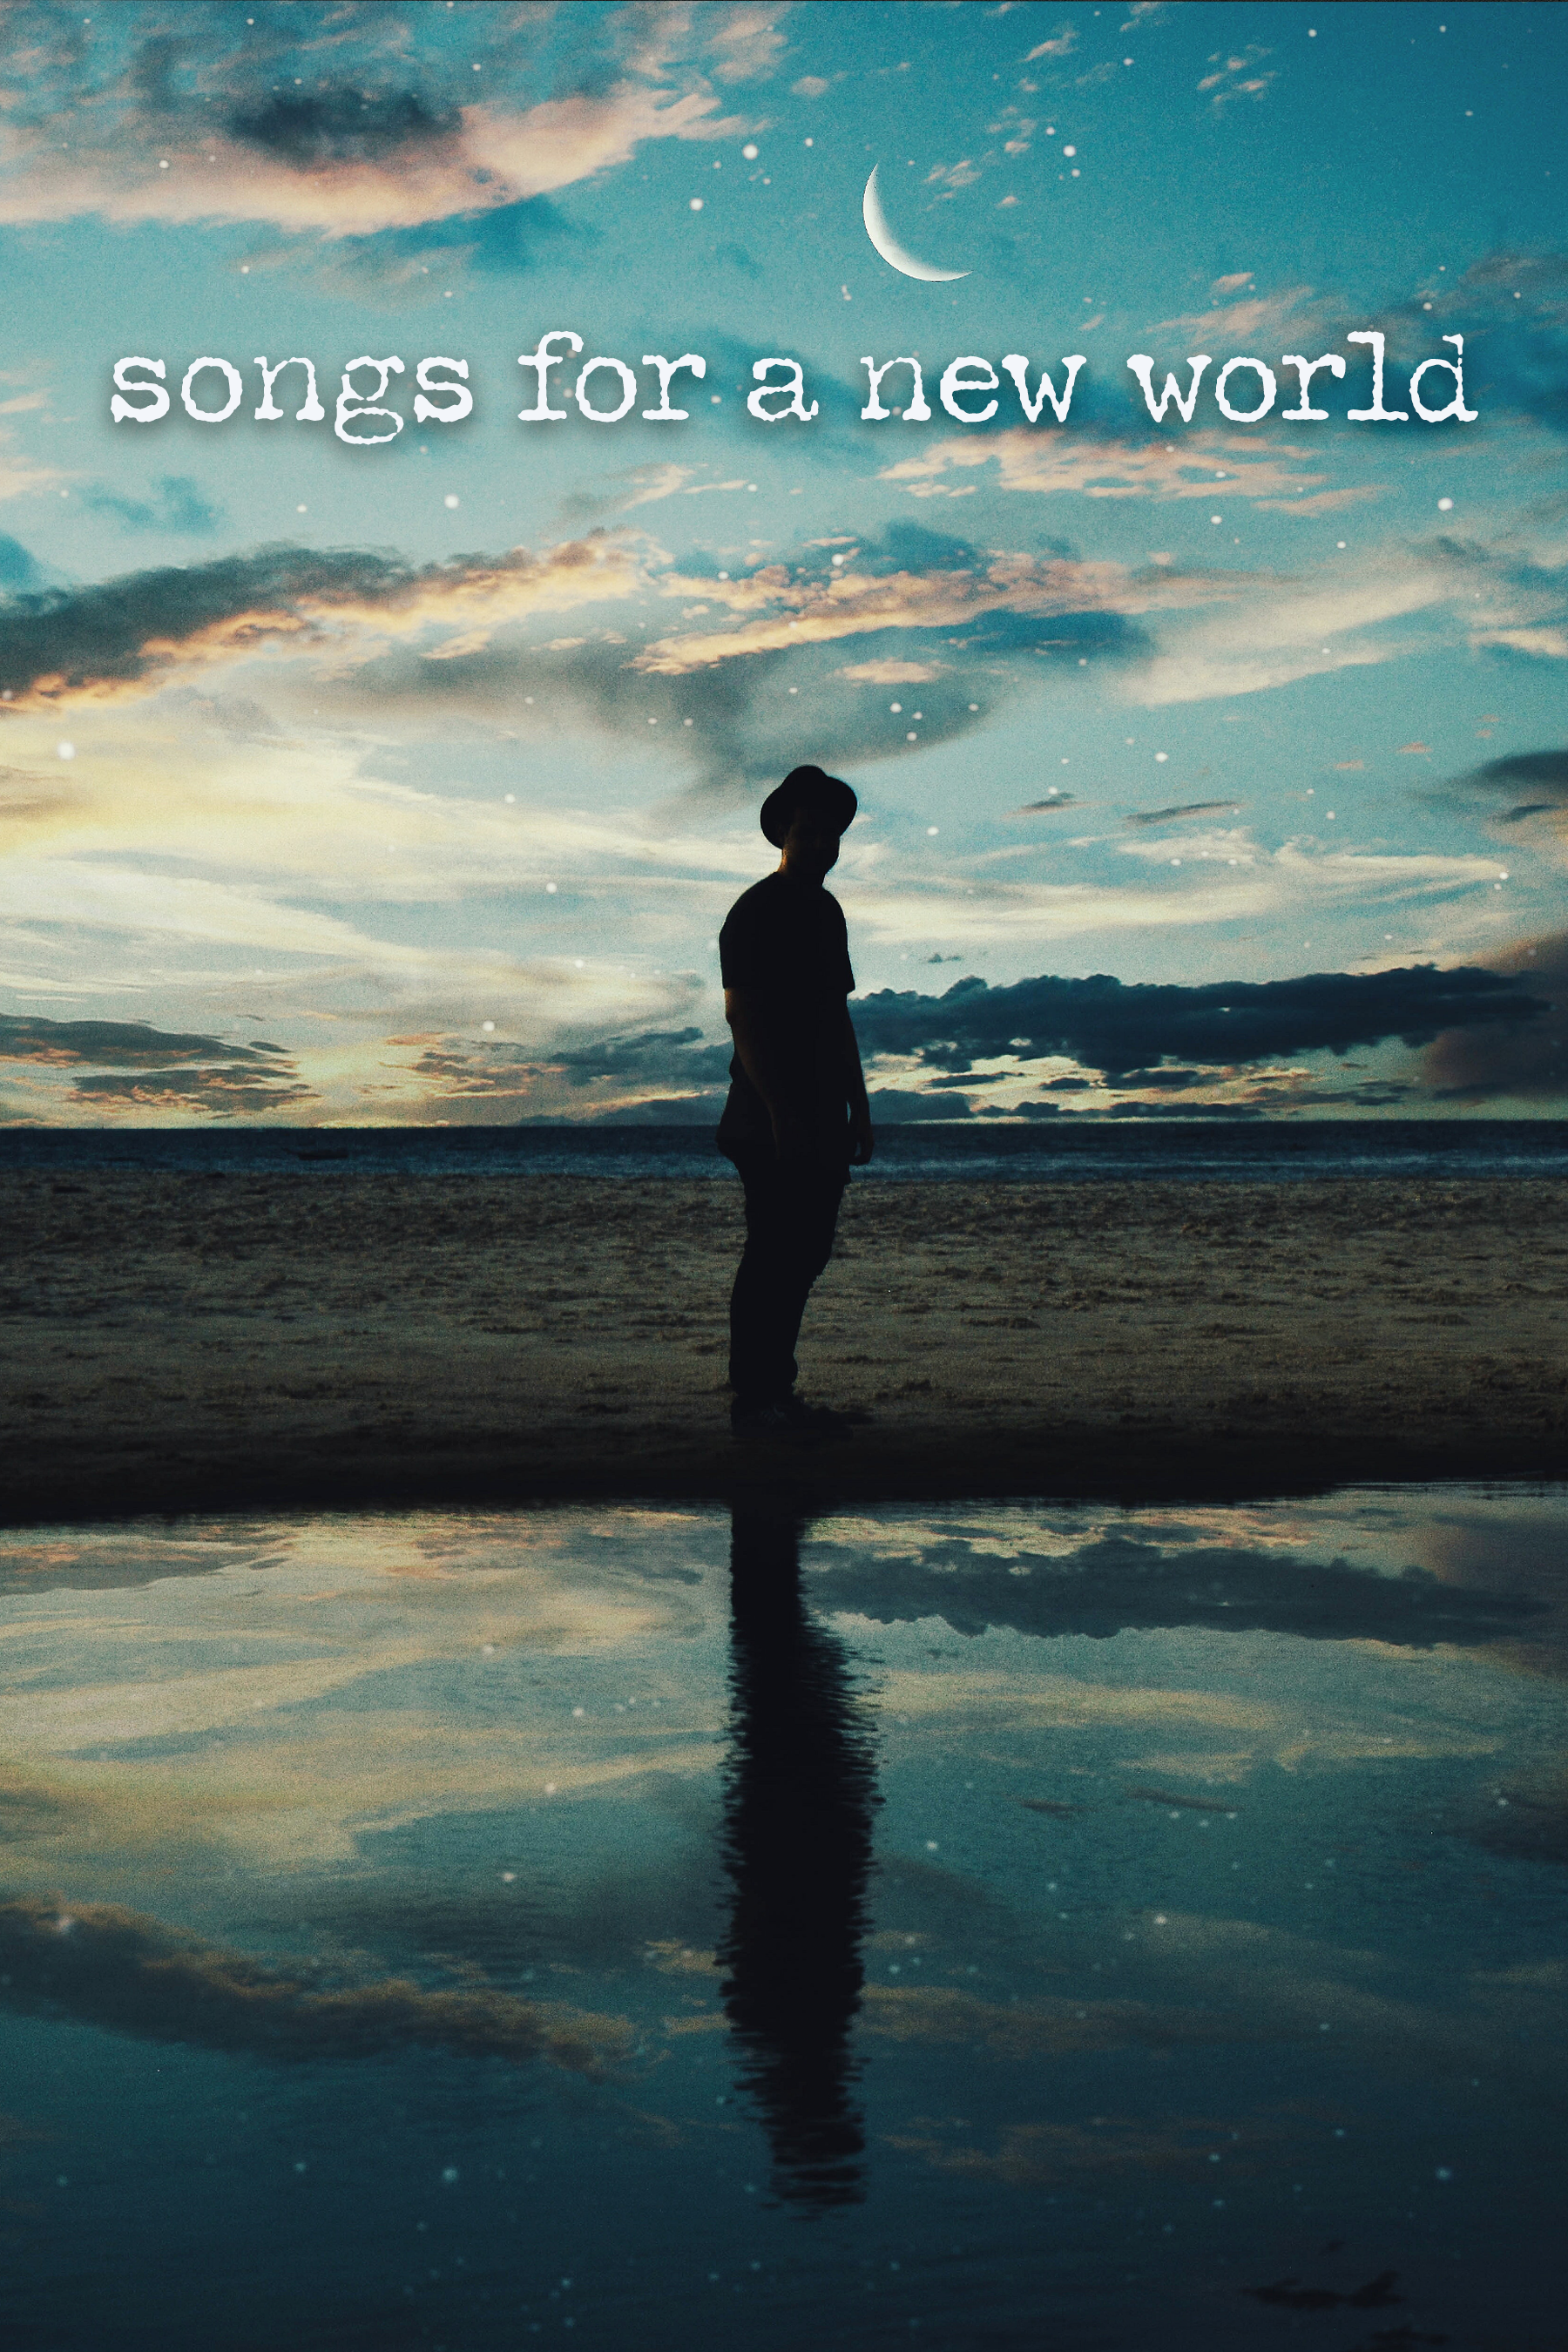 Songs for a New World Poster